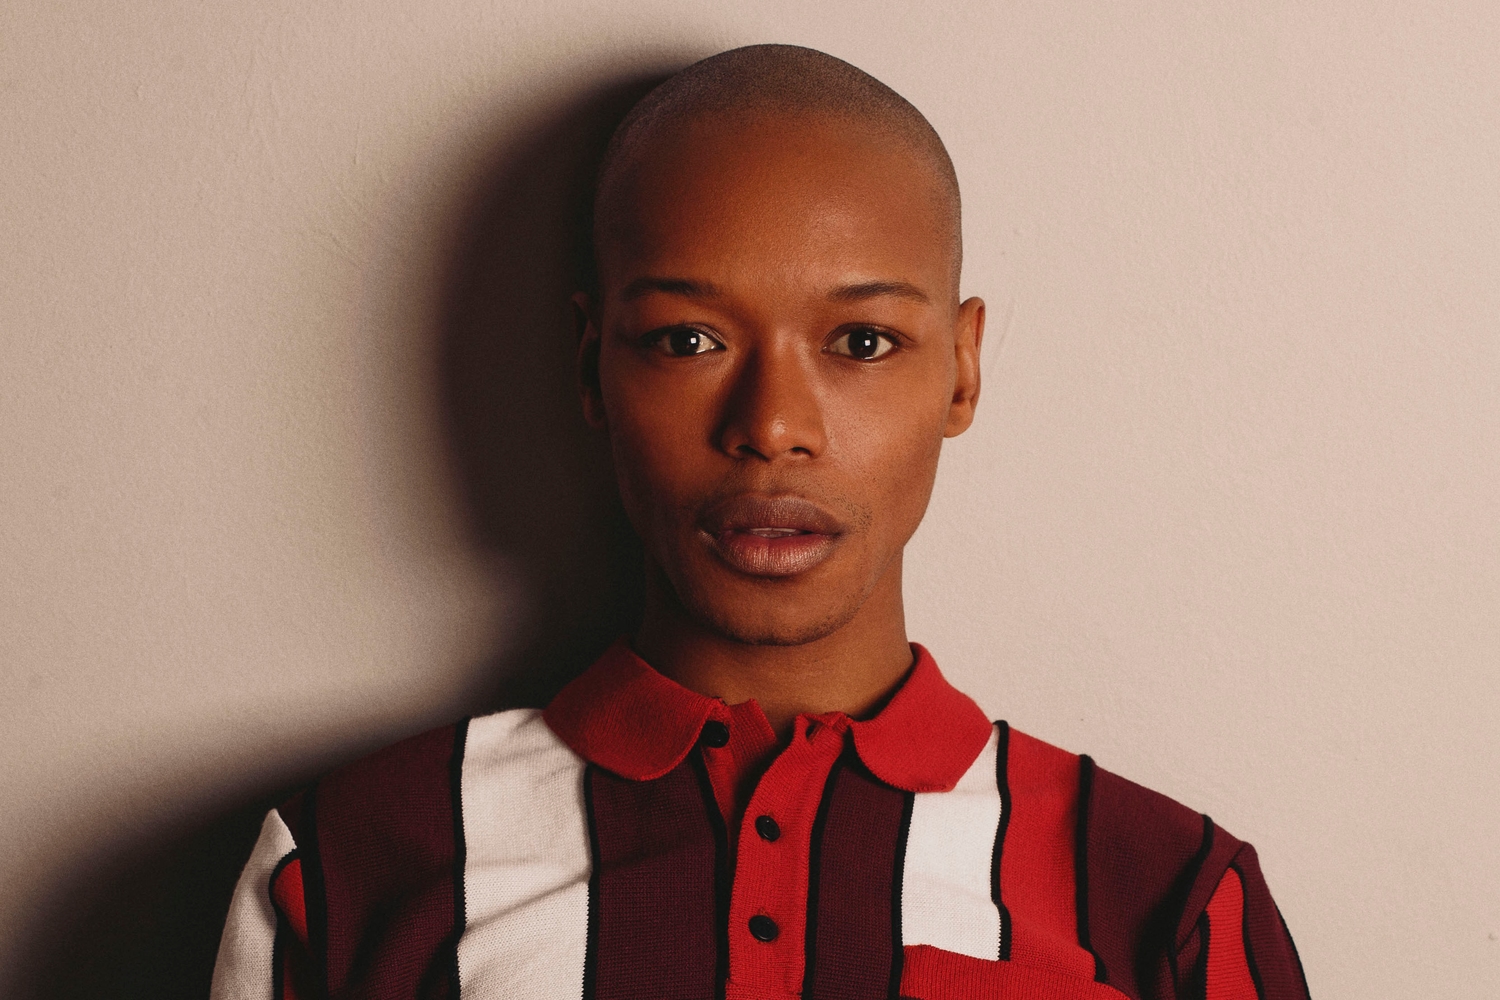 The time for moving on: Nakhane